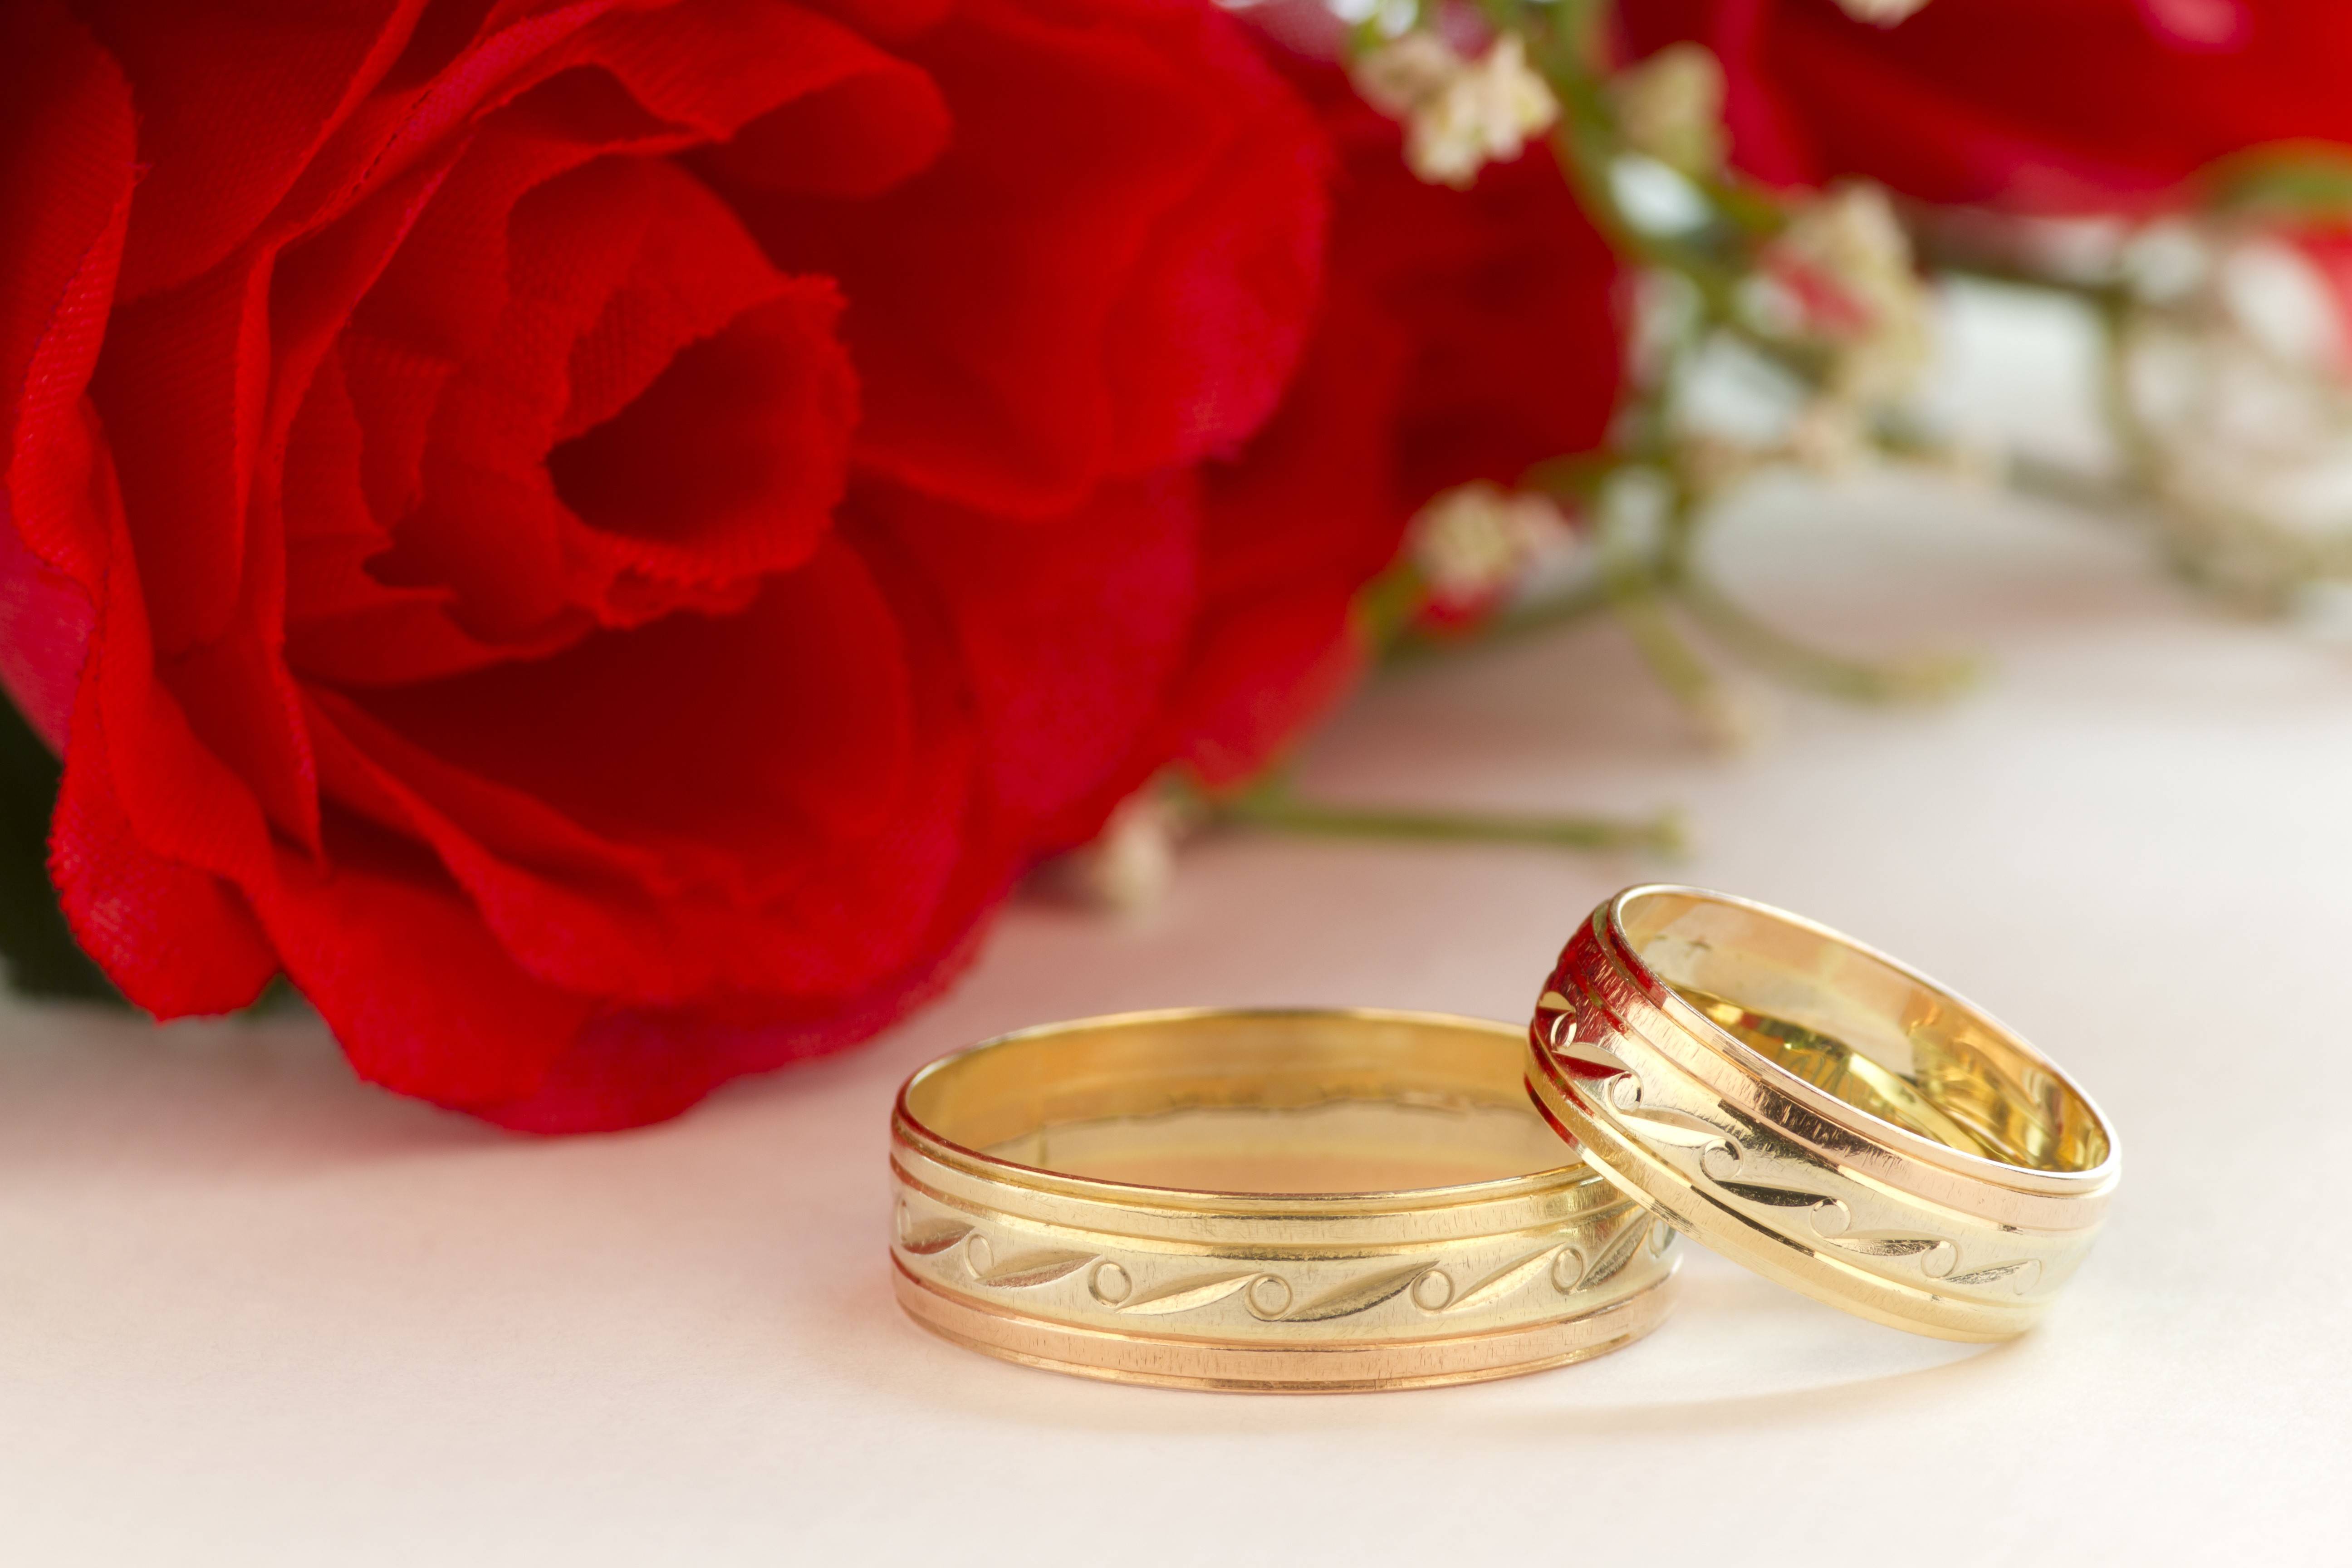 Platinum Love Bands | Couple Rings for Gifting, Engagement & Weddings